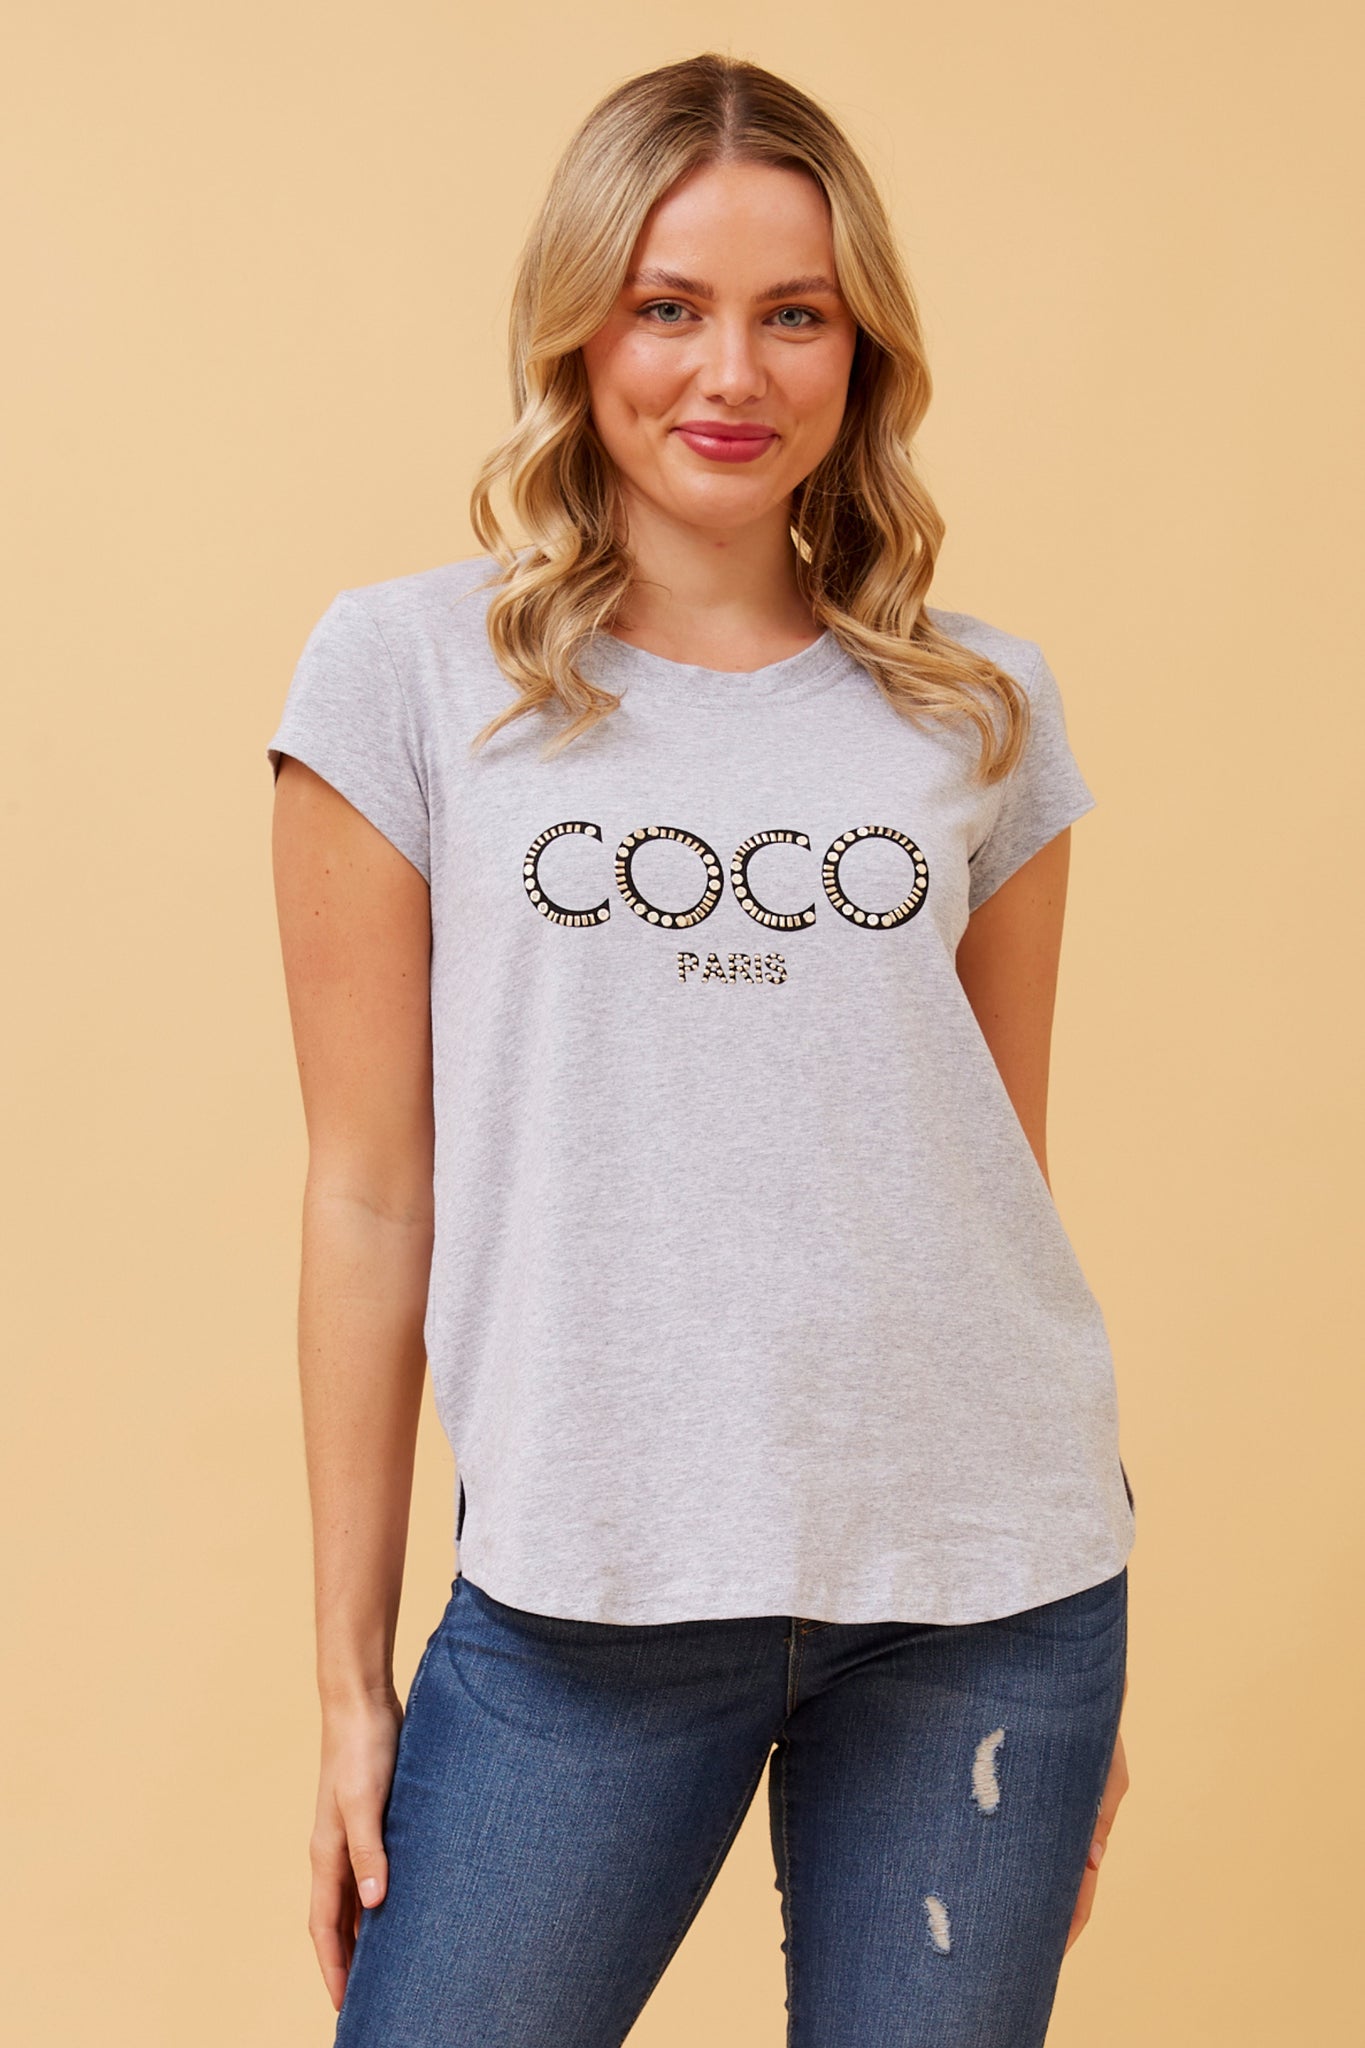 COCO EMBELLISHED GRAPHIC TEE